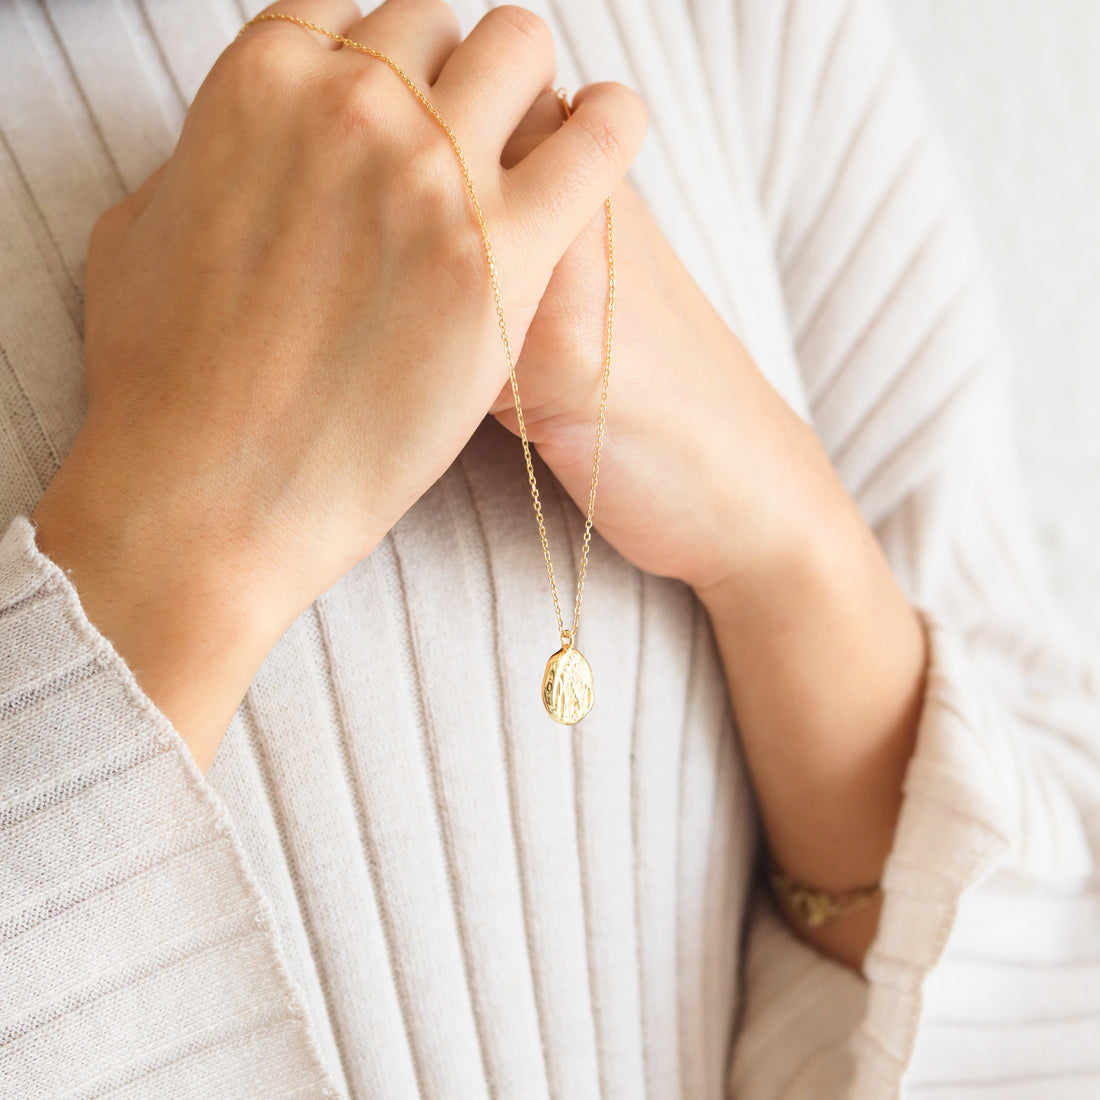 Image of a woman wearing a white cardigan holding a gold necklace from Jewmei, online jewelry store in Canada